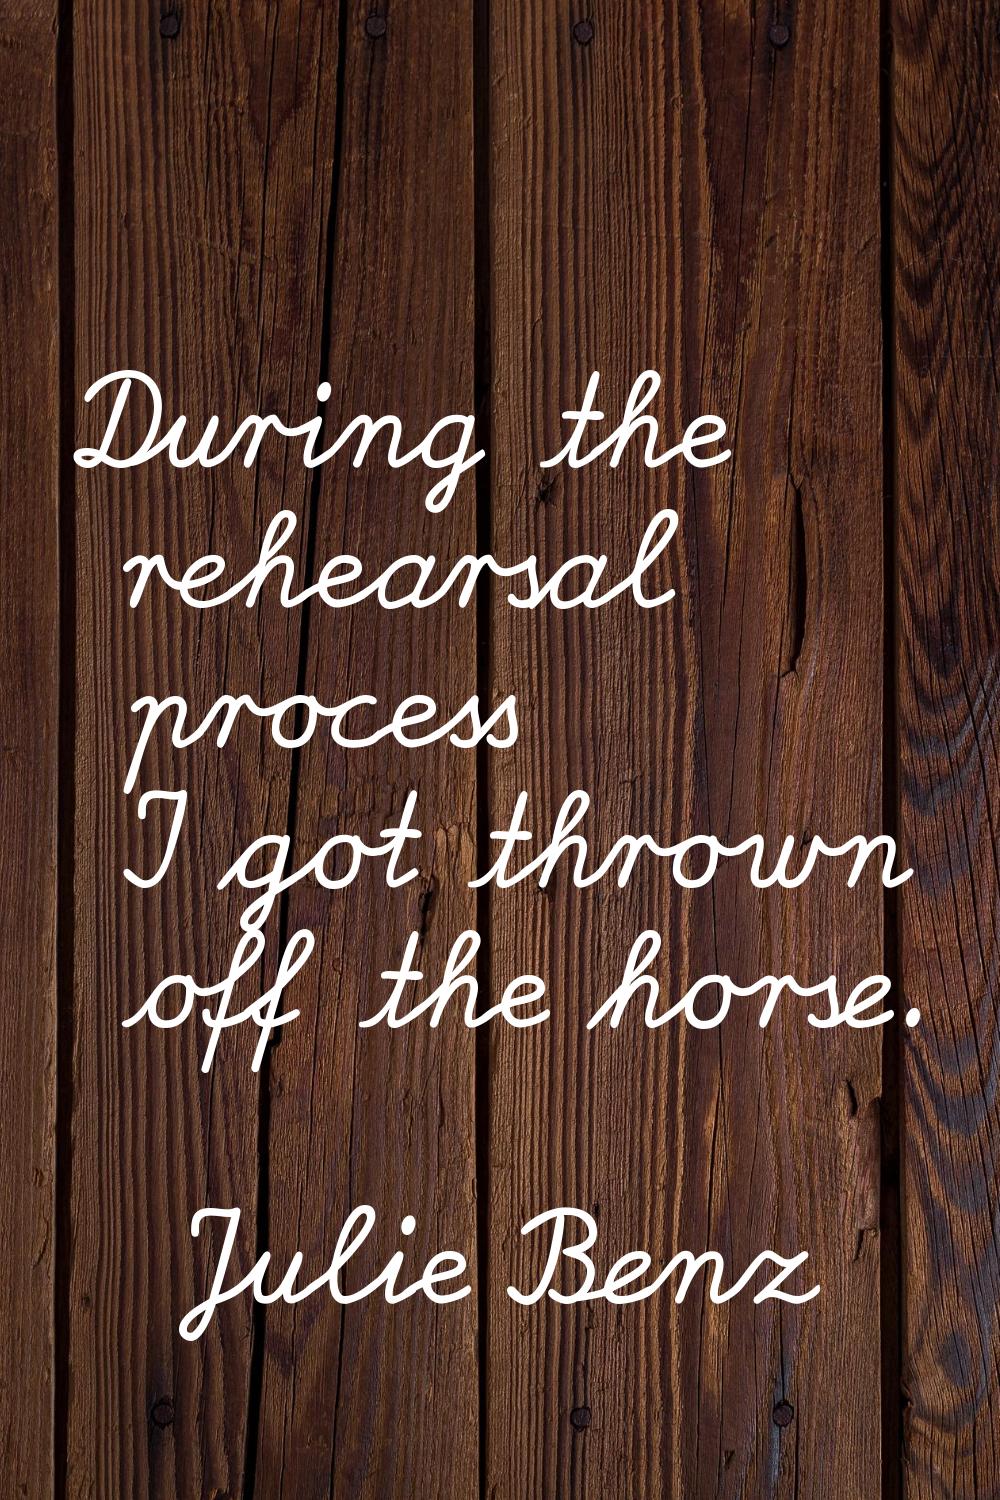 During the rehearsal process I got thrown off the horse.